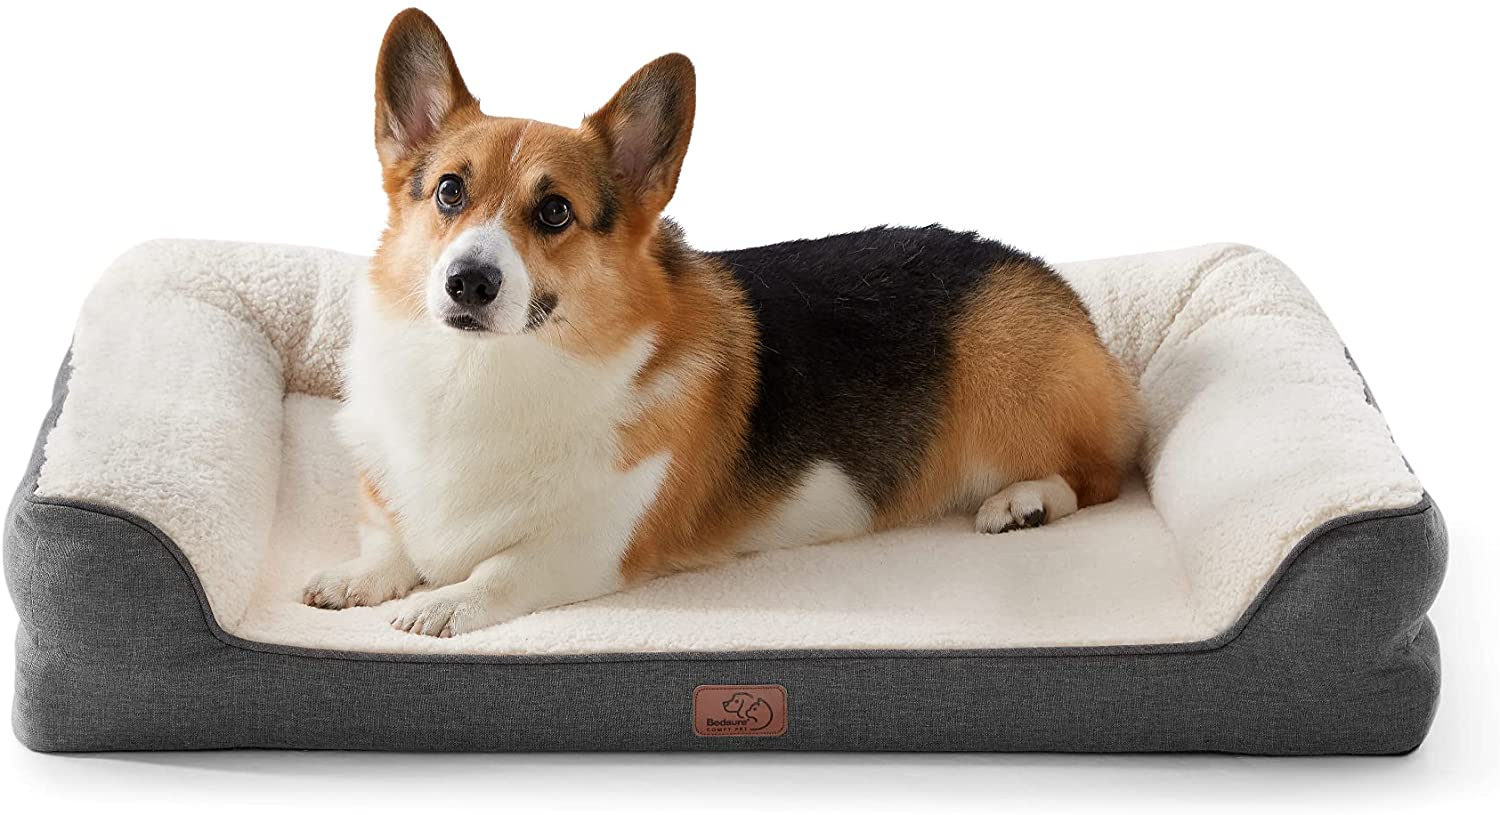 Amazon Choice Pet Beds for Cool Weather get Enthusiastic Reviews from Customers